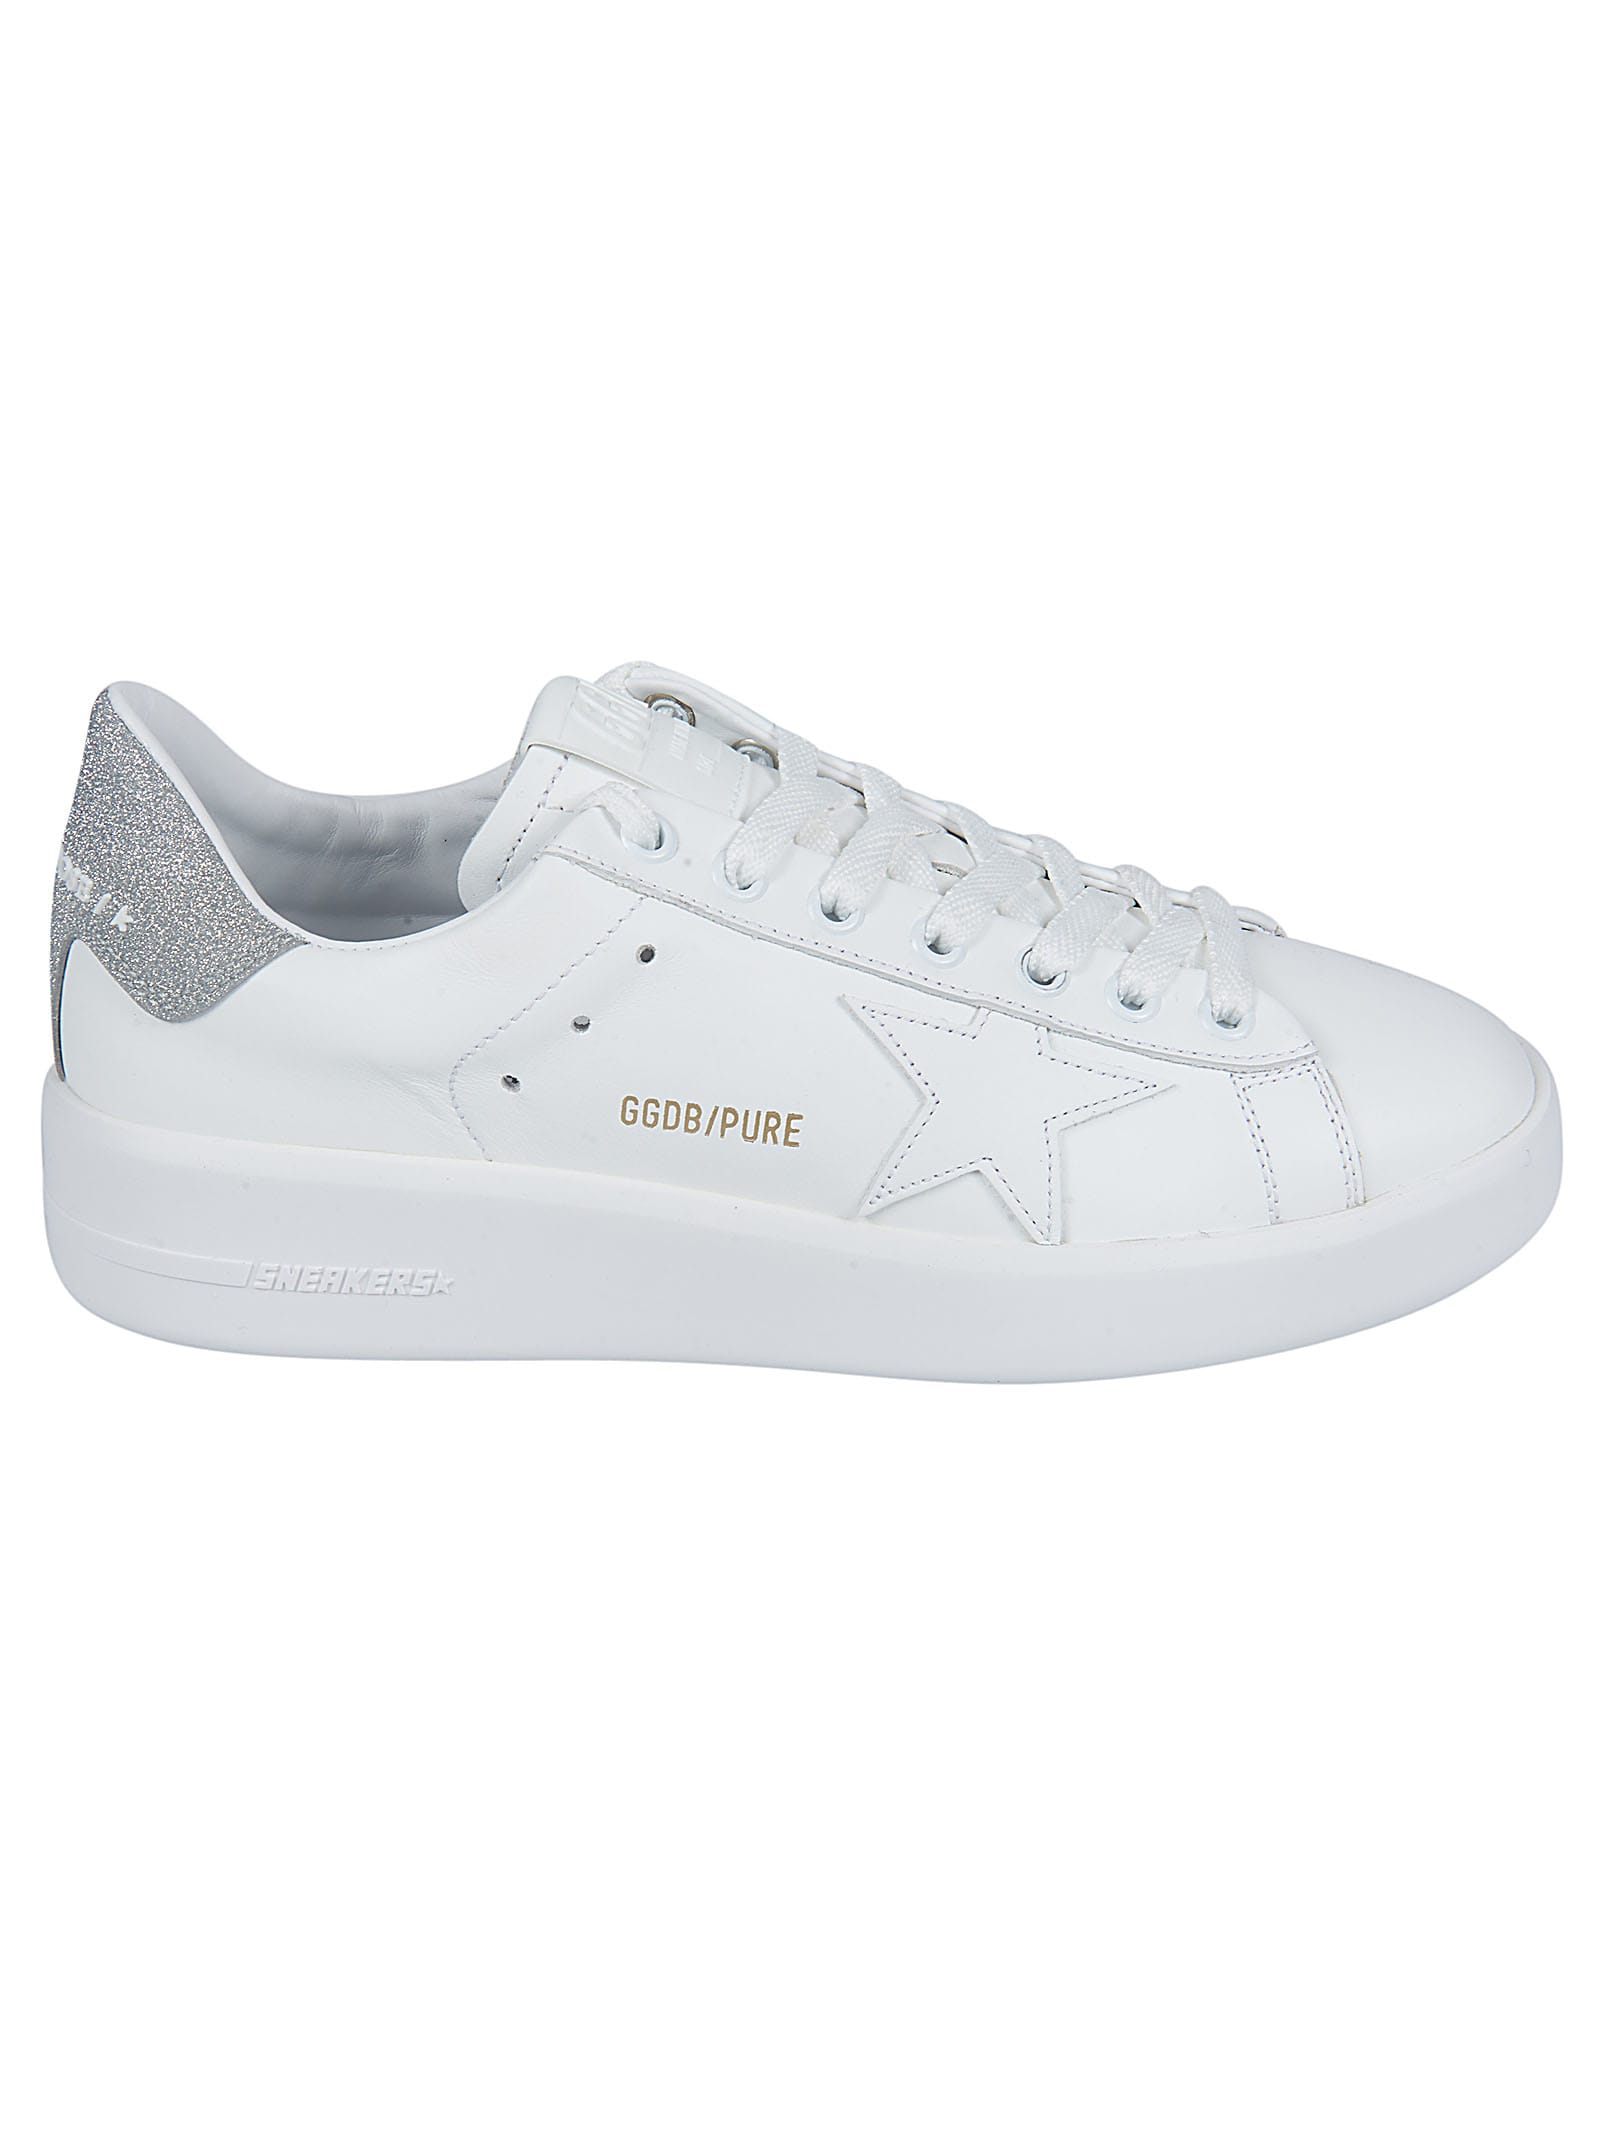 Buy Golden Goose New Pure Sneakers online, shop Golden Goose shoes with free shipping